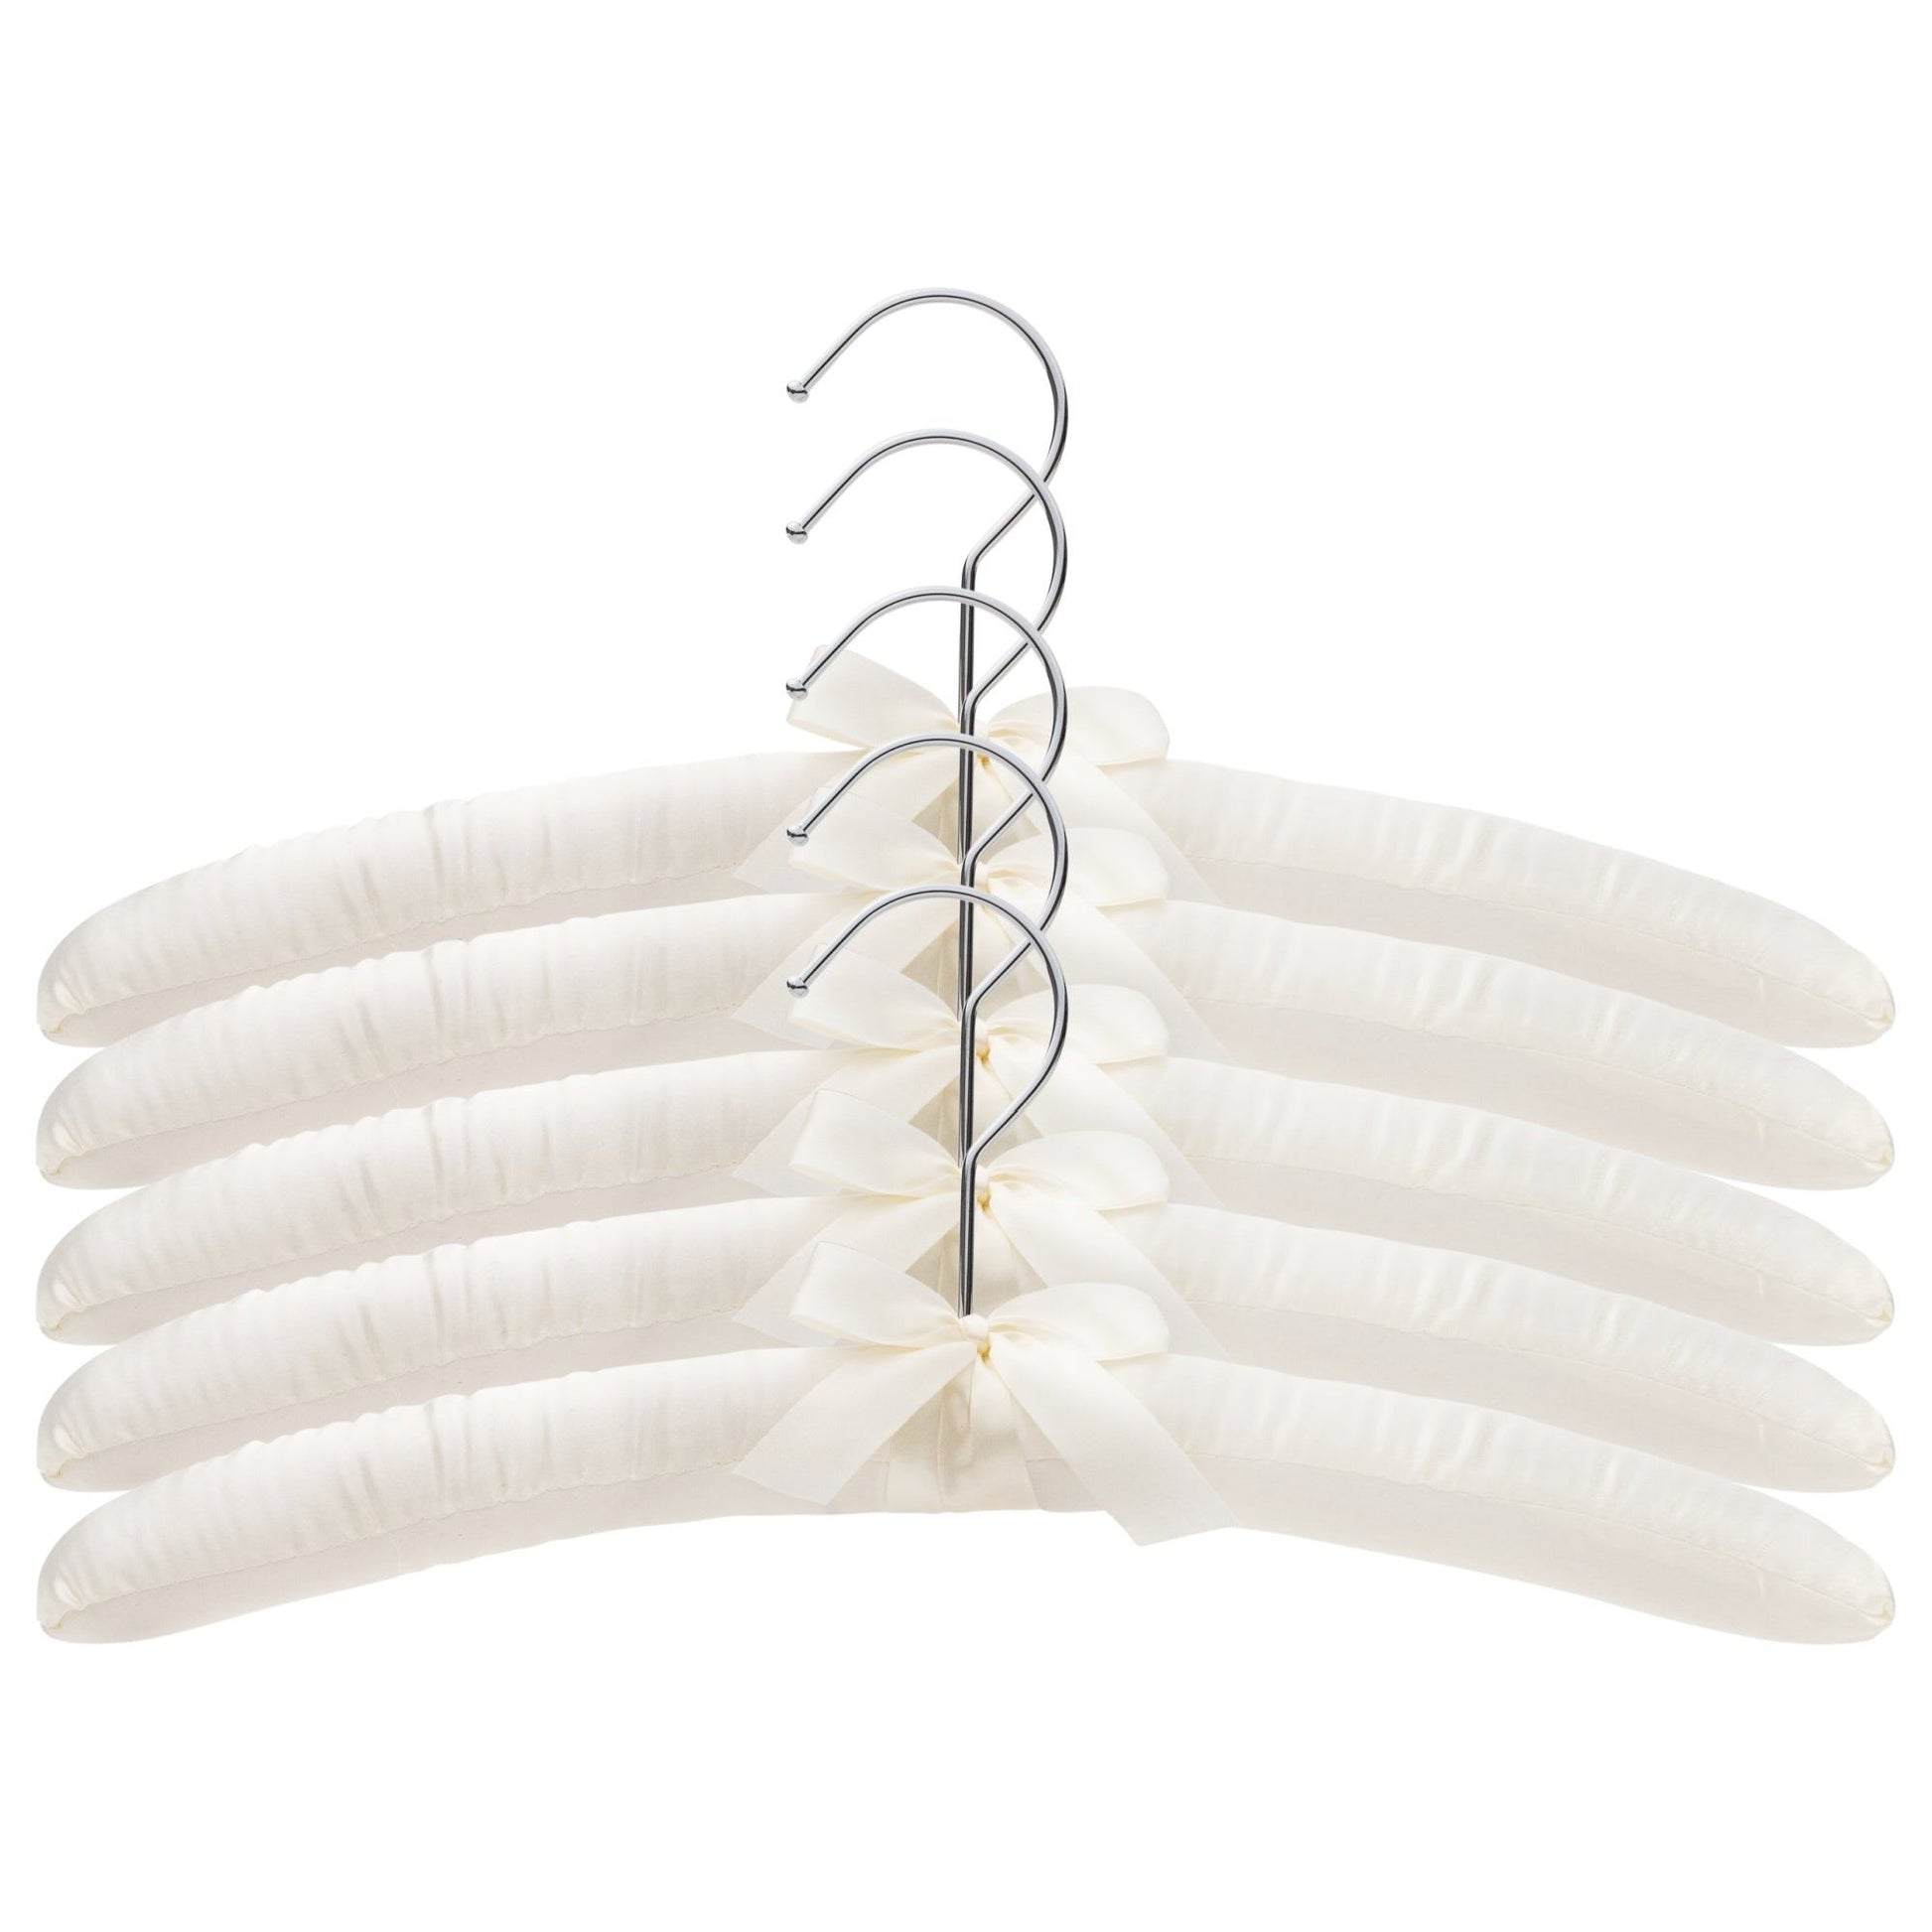 Padded Coat Hangers With Chrome Hook - Ivory - 38cm X 45mm Thick (Sold in Bundles of 20/50) - Hangersforless